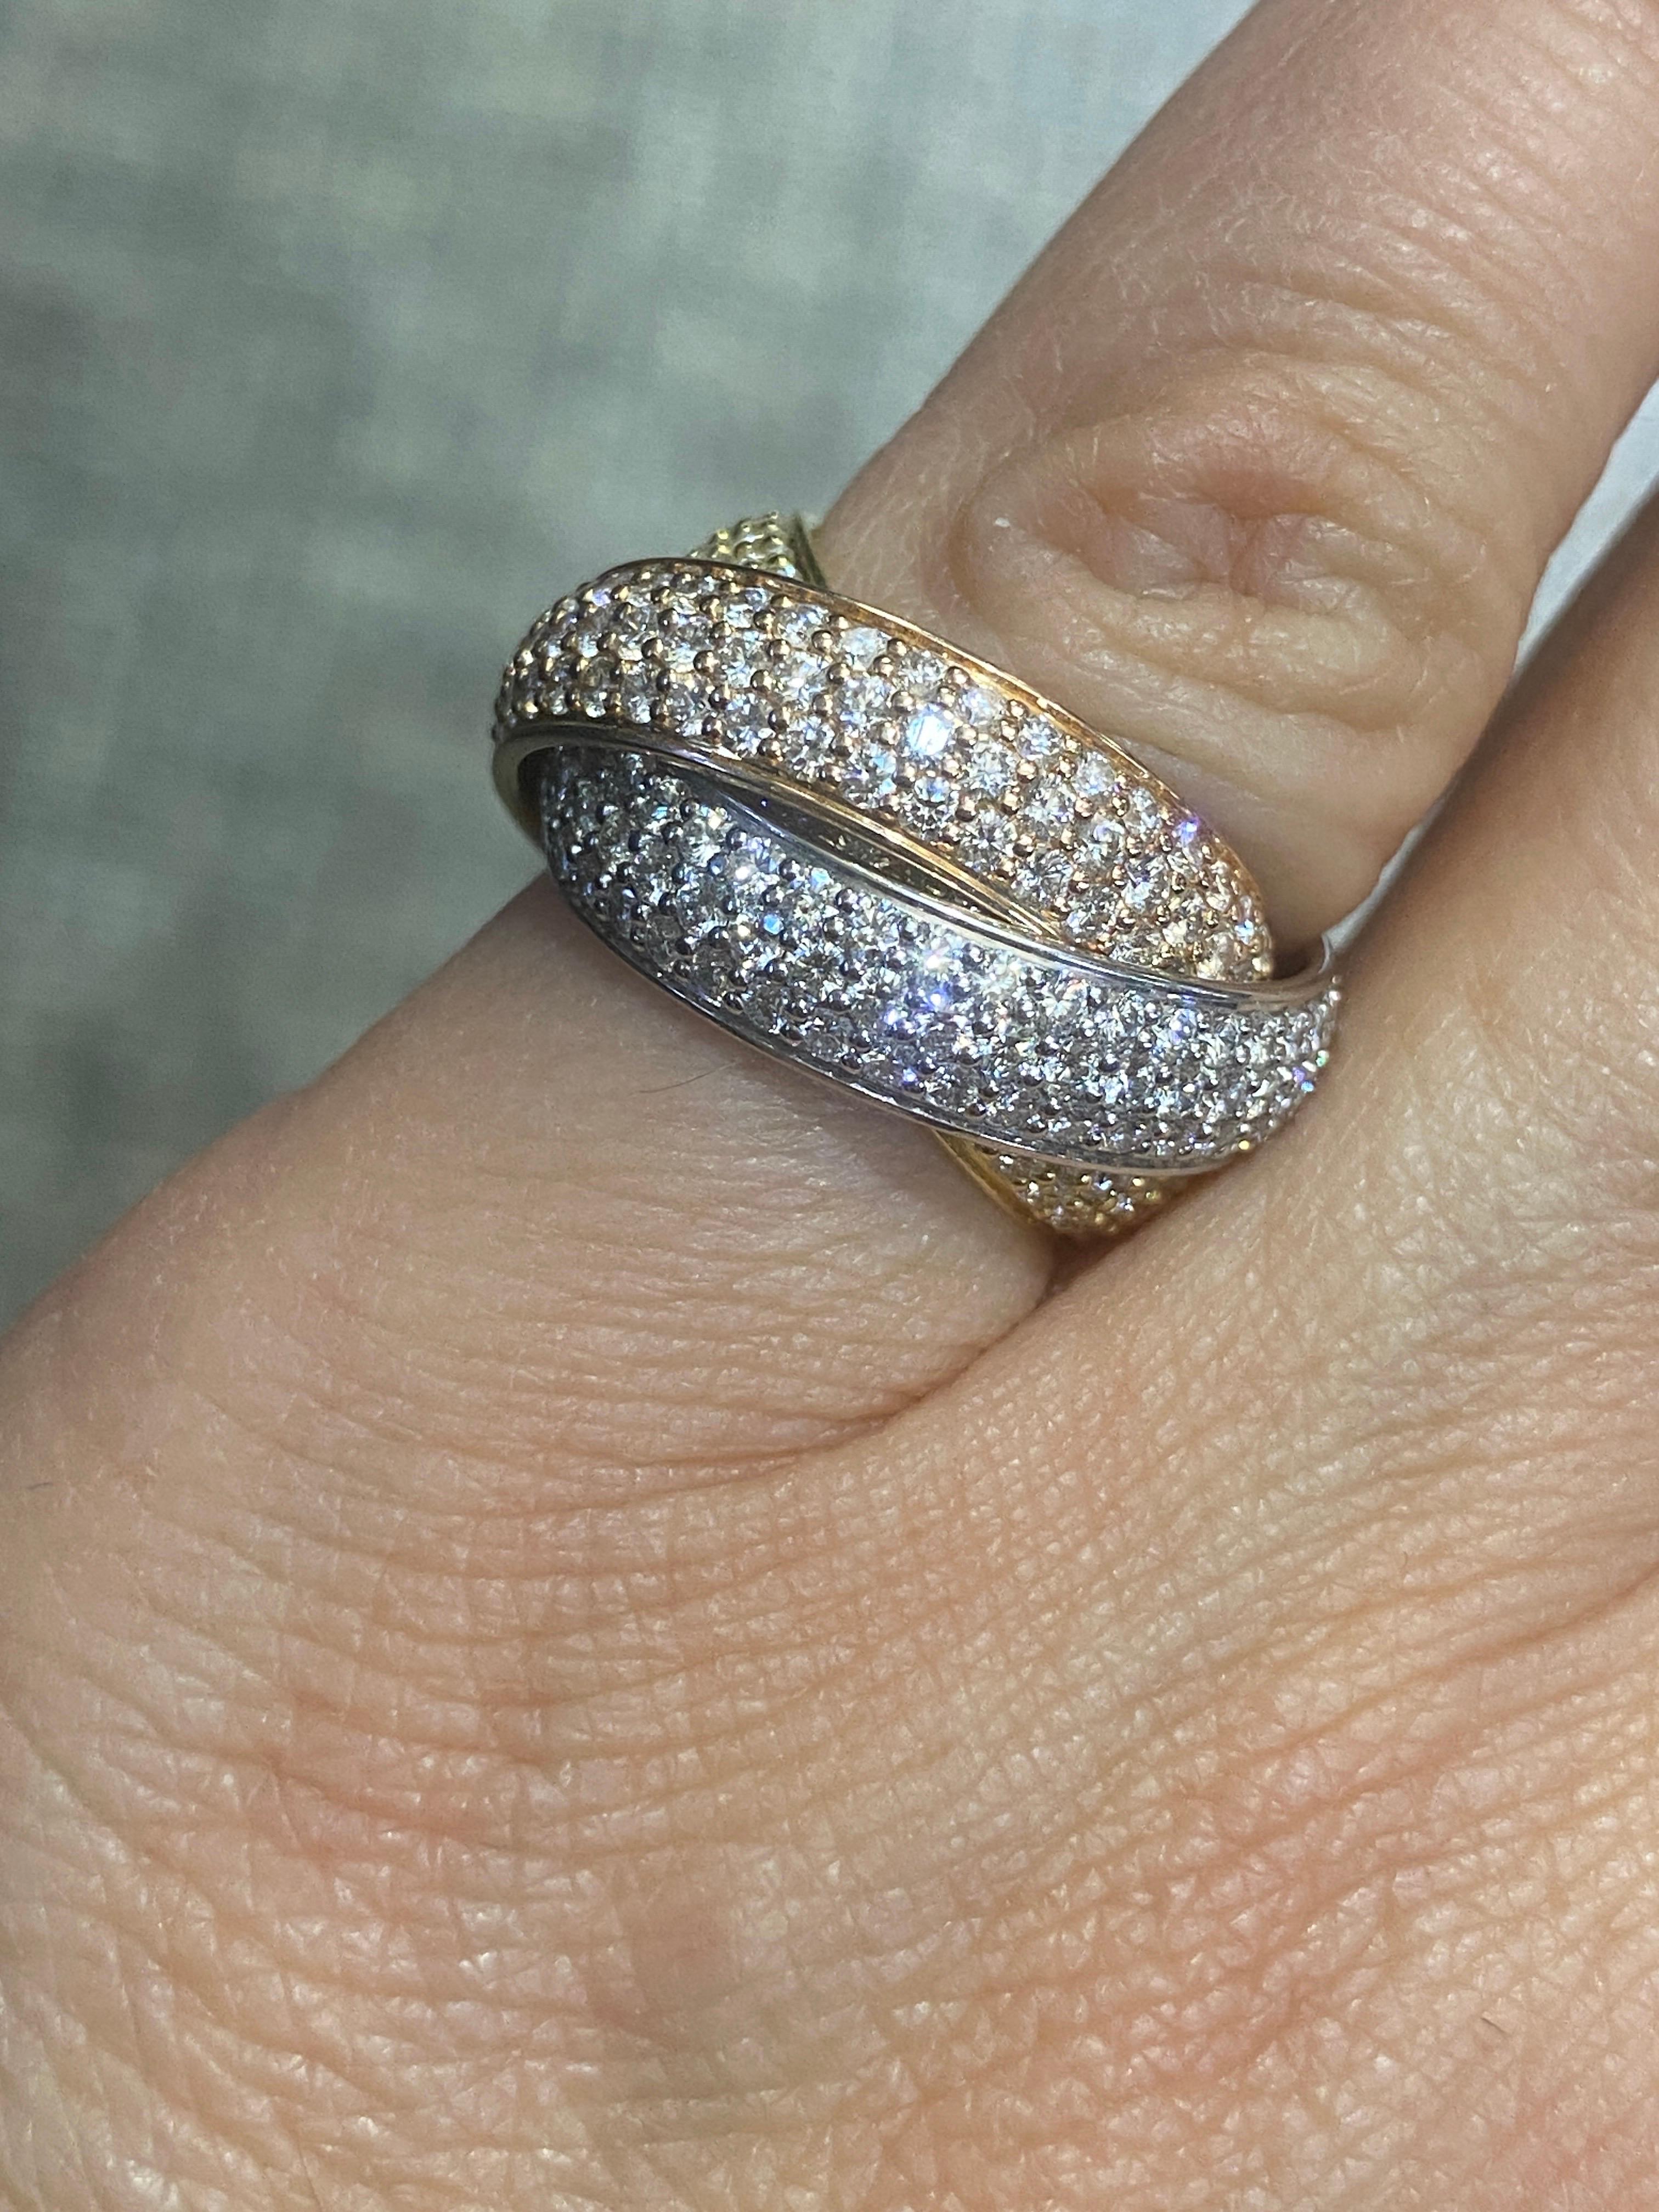 This beautiful wide diamond pave Trinity ring in white, yellow and rose gold is a Cartier classic dating circa 1980s. It is a small size suitable for slim fingers or to be worn as a pinky ring.